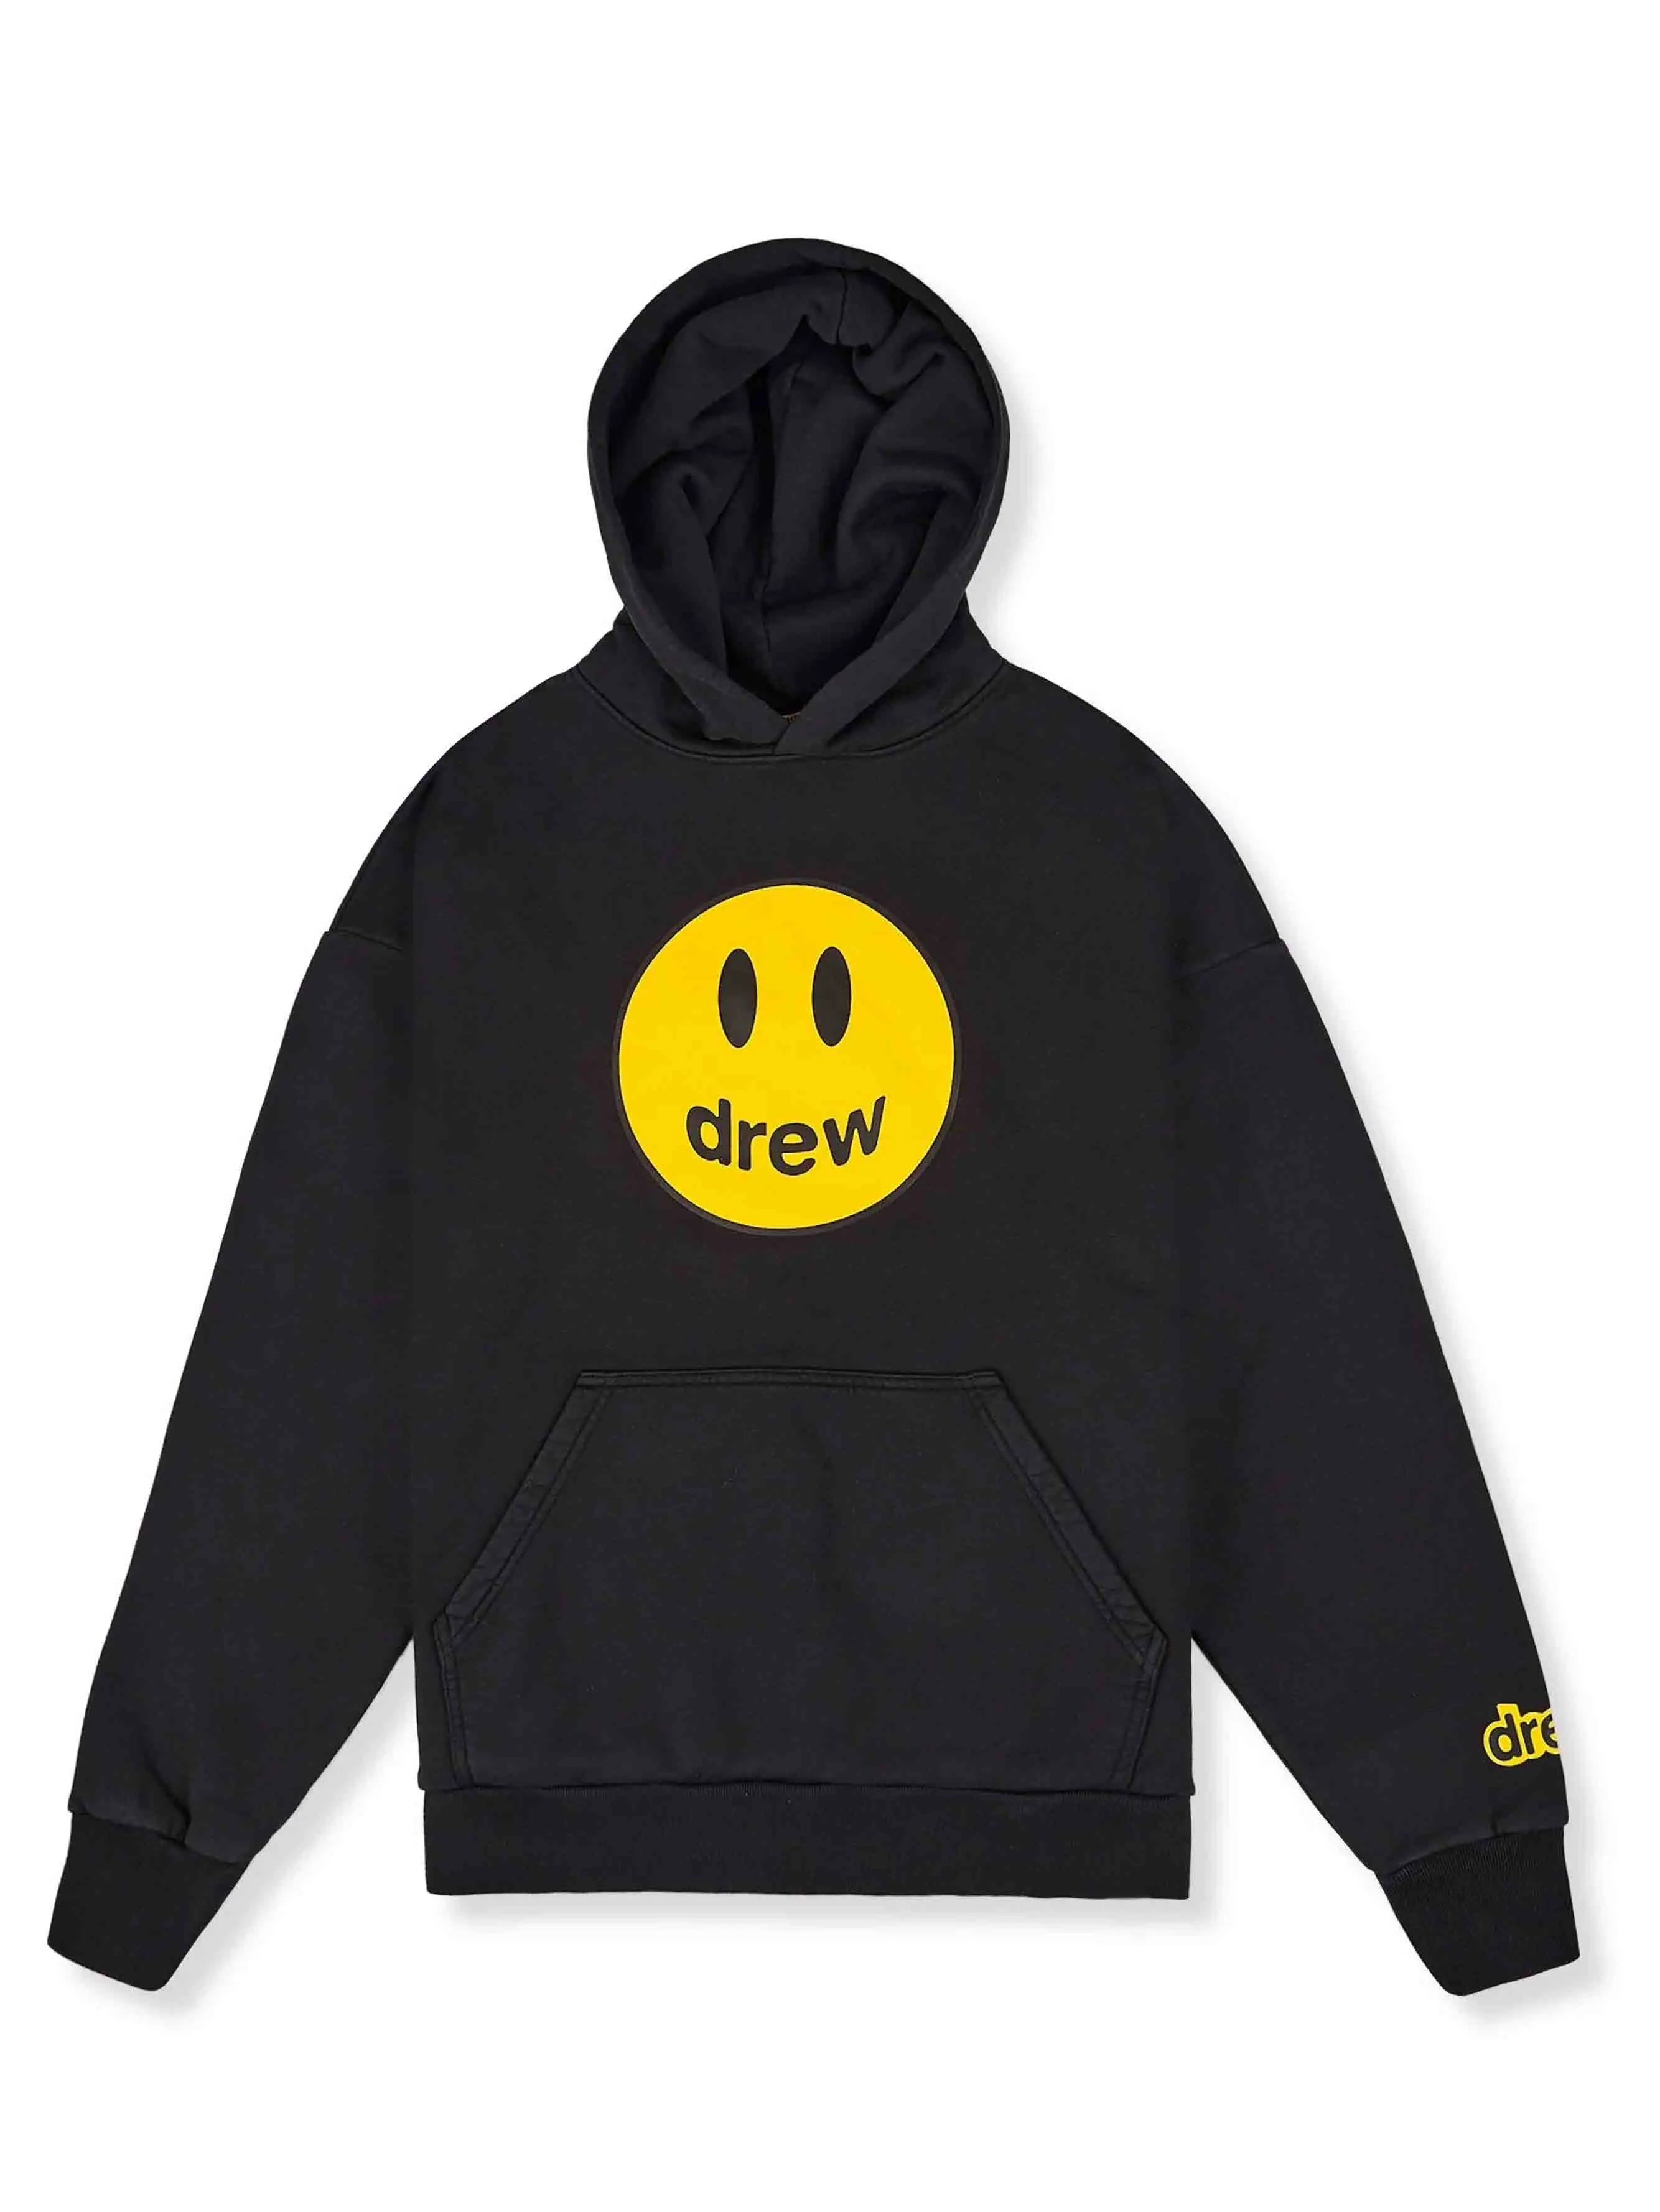 drew house mascot hoodie black in Auckland, New Zealand - Prior